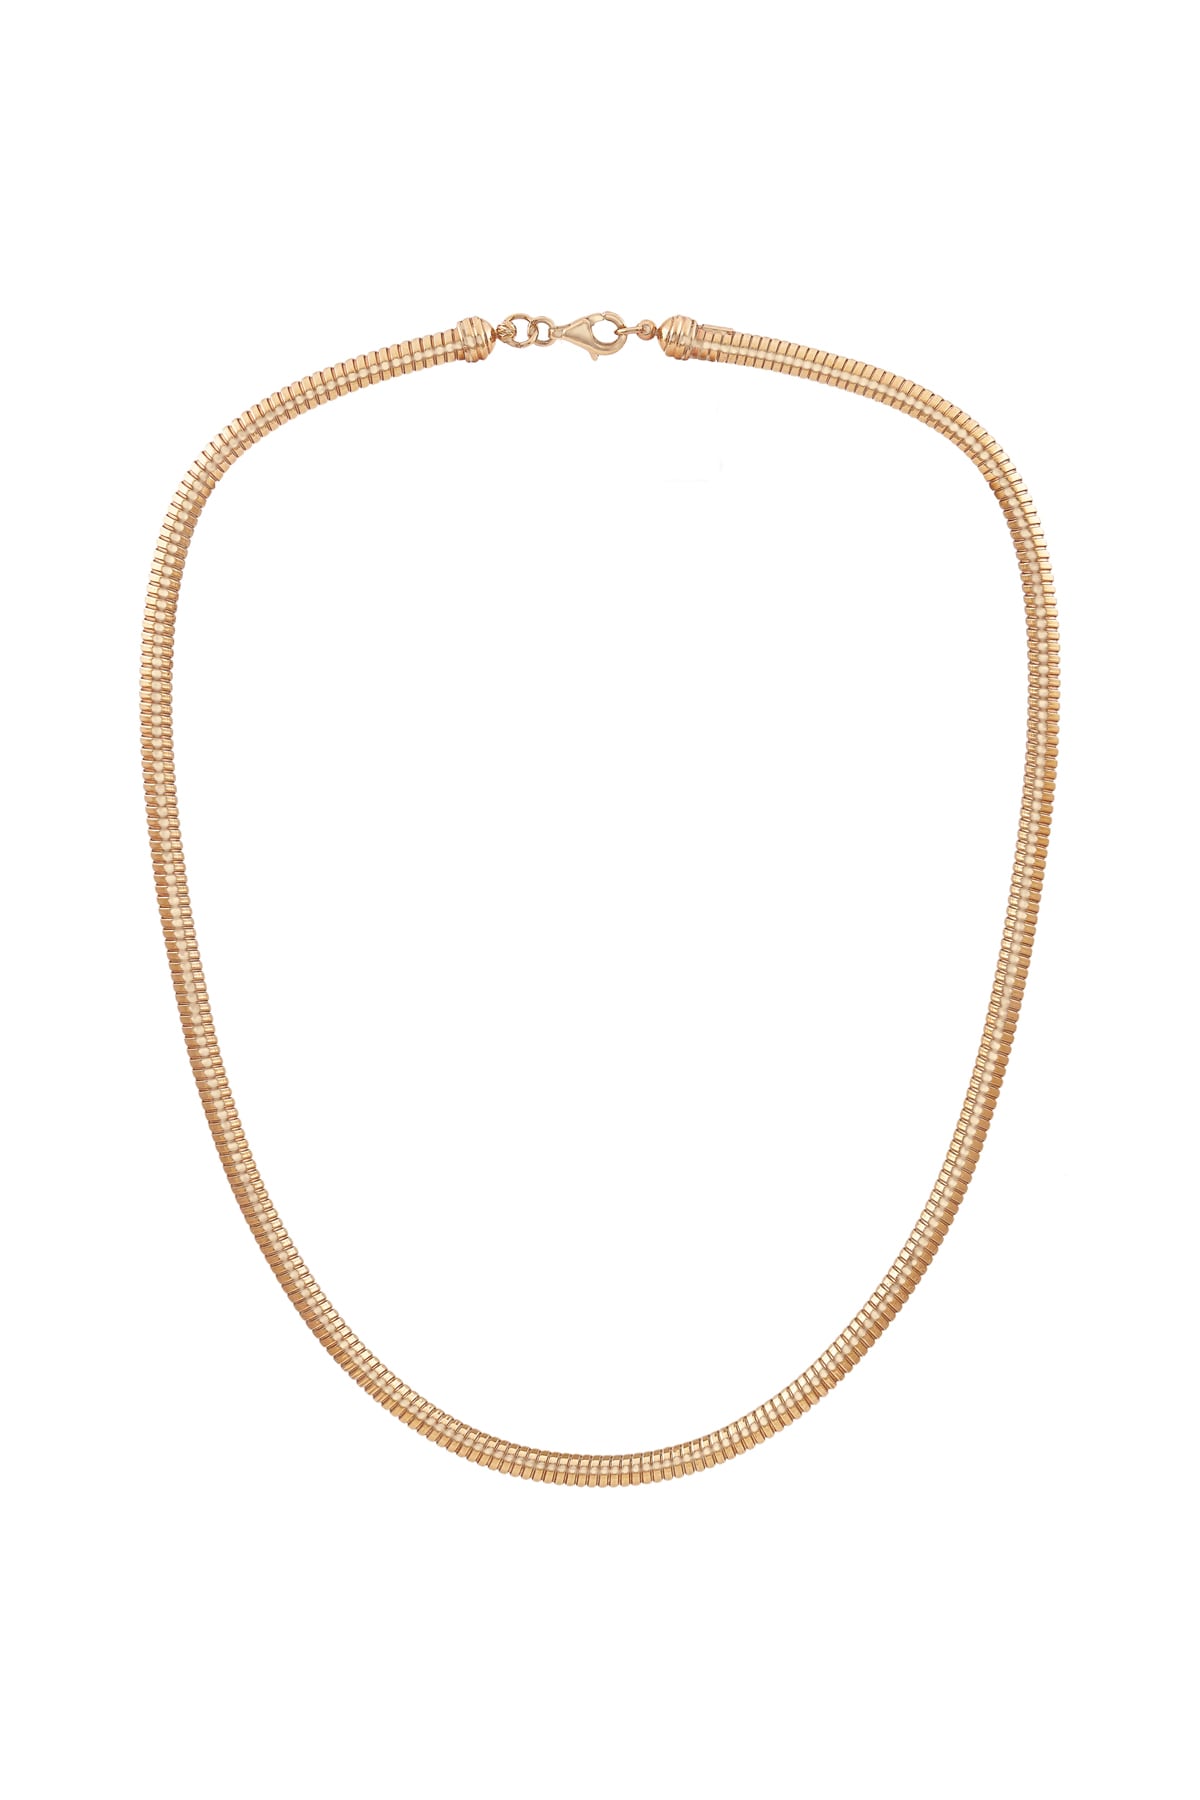 Fancy Snake Style Collier Chain In 14ct Italian Rose Gold from LeGassick Jewellery Gold Coast.